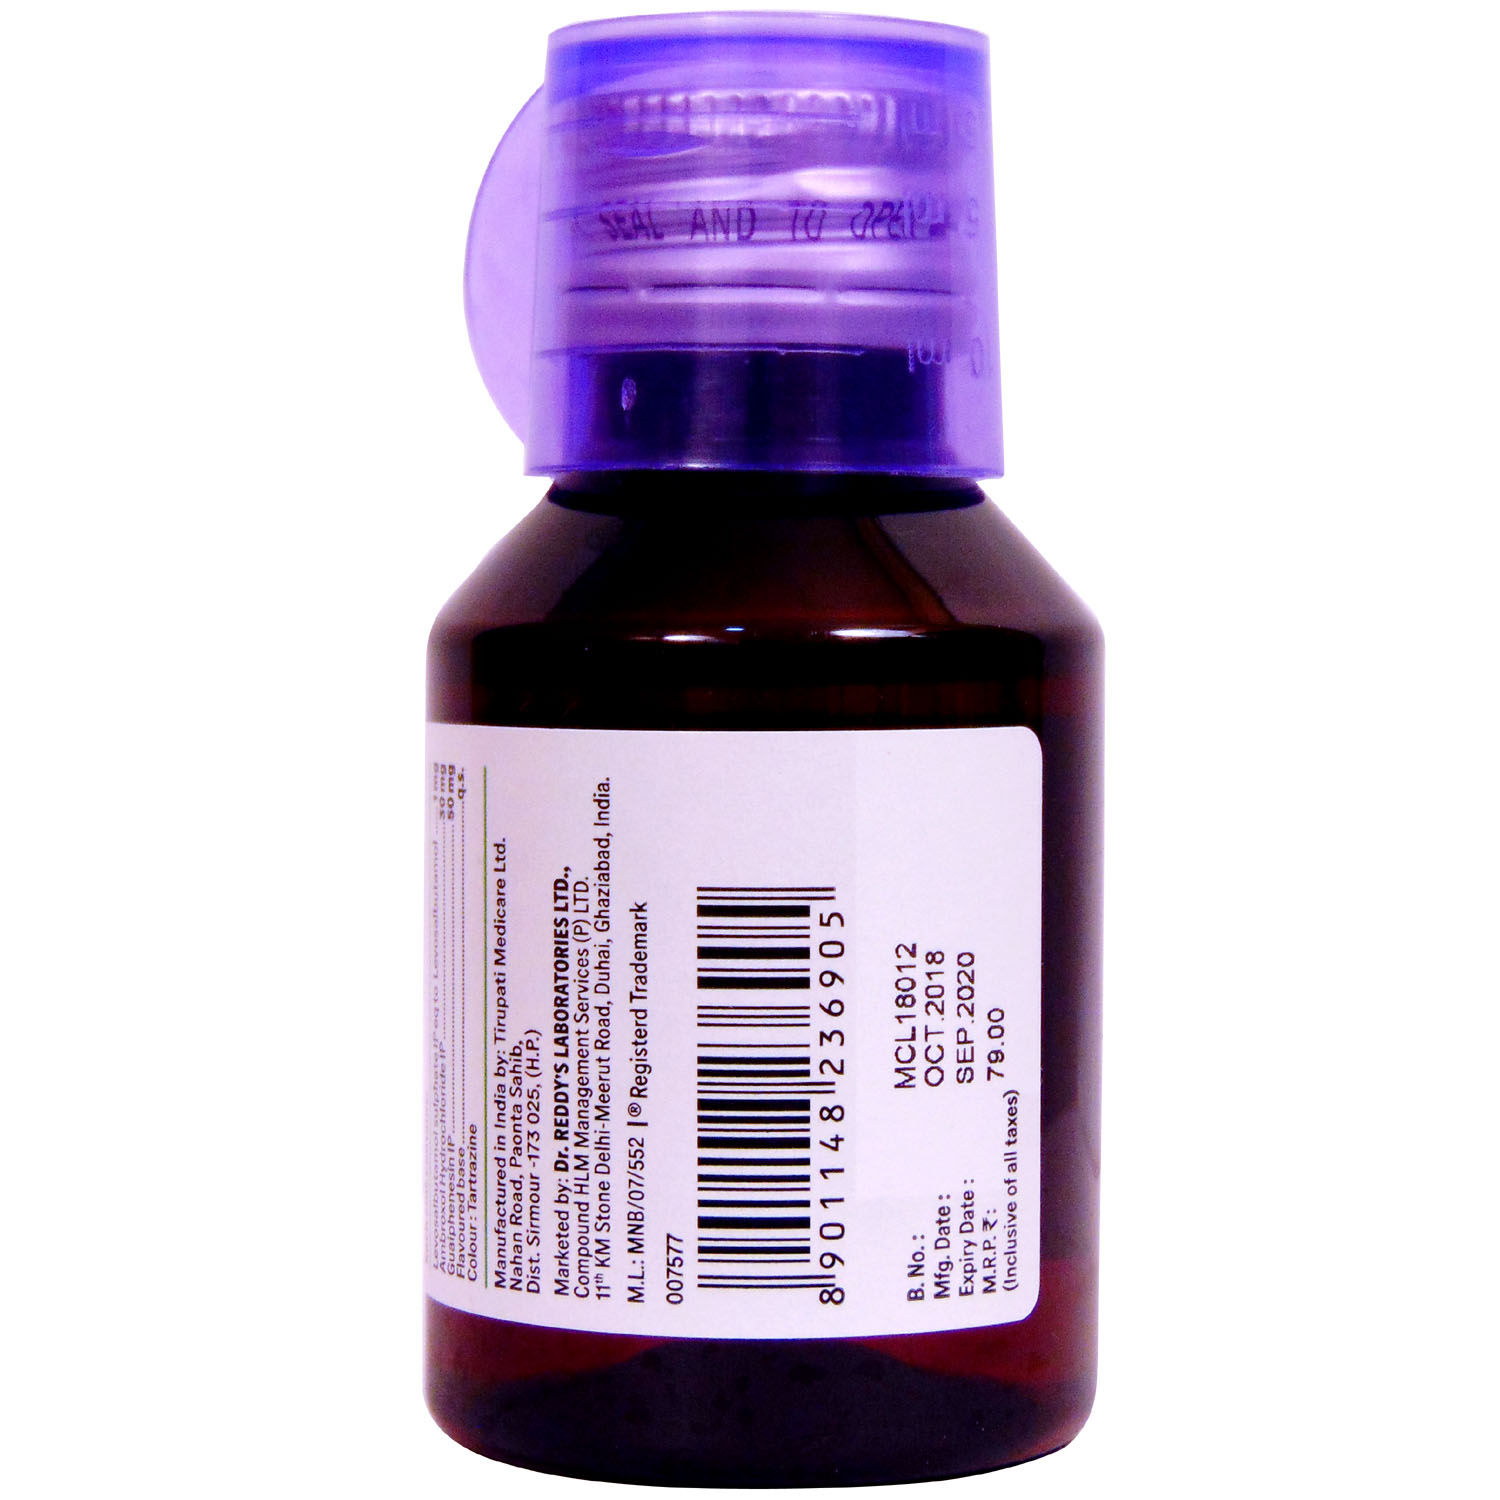 Mucolite LS Syrup 60 ml, Pack of 1 Syrup